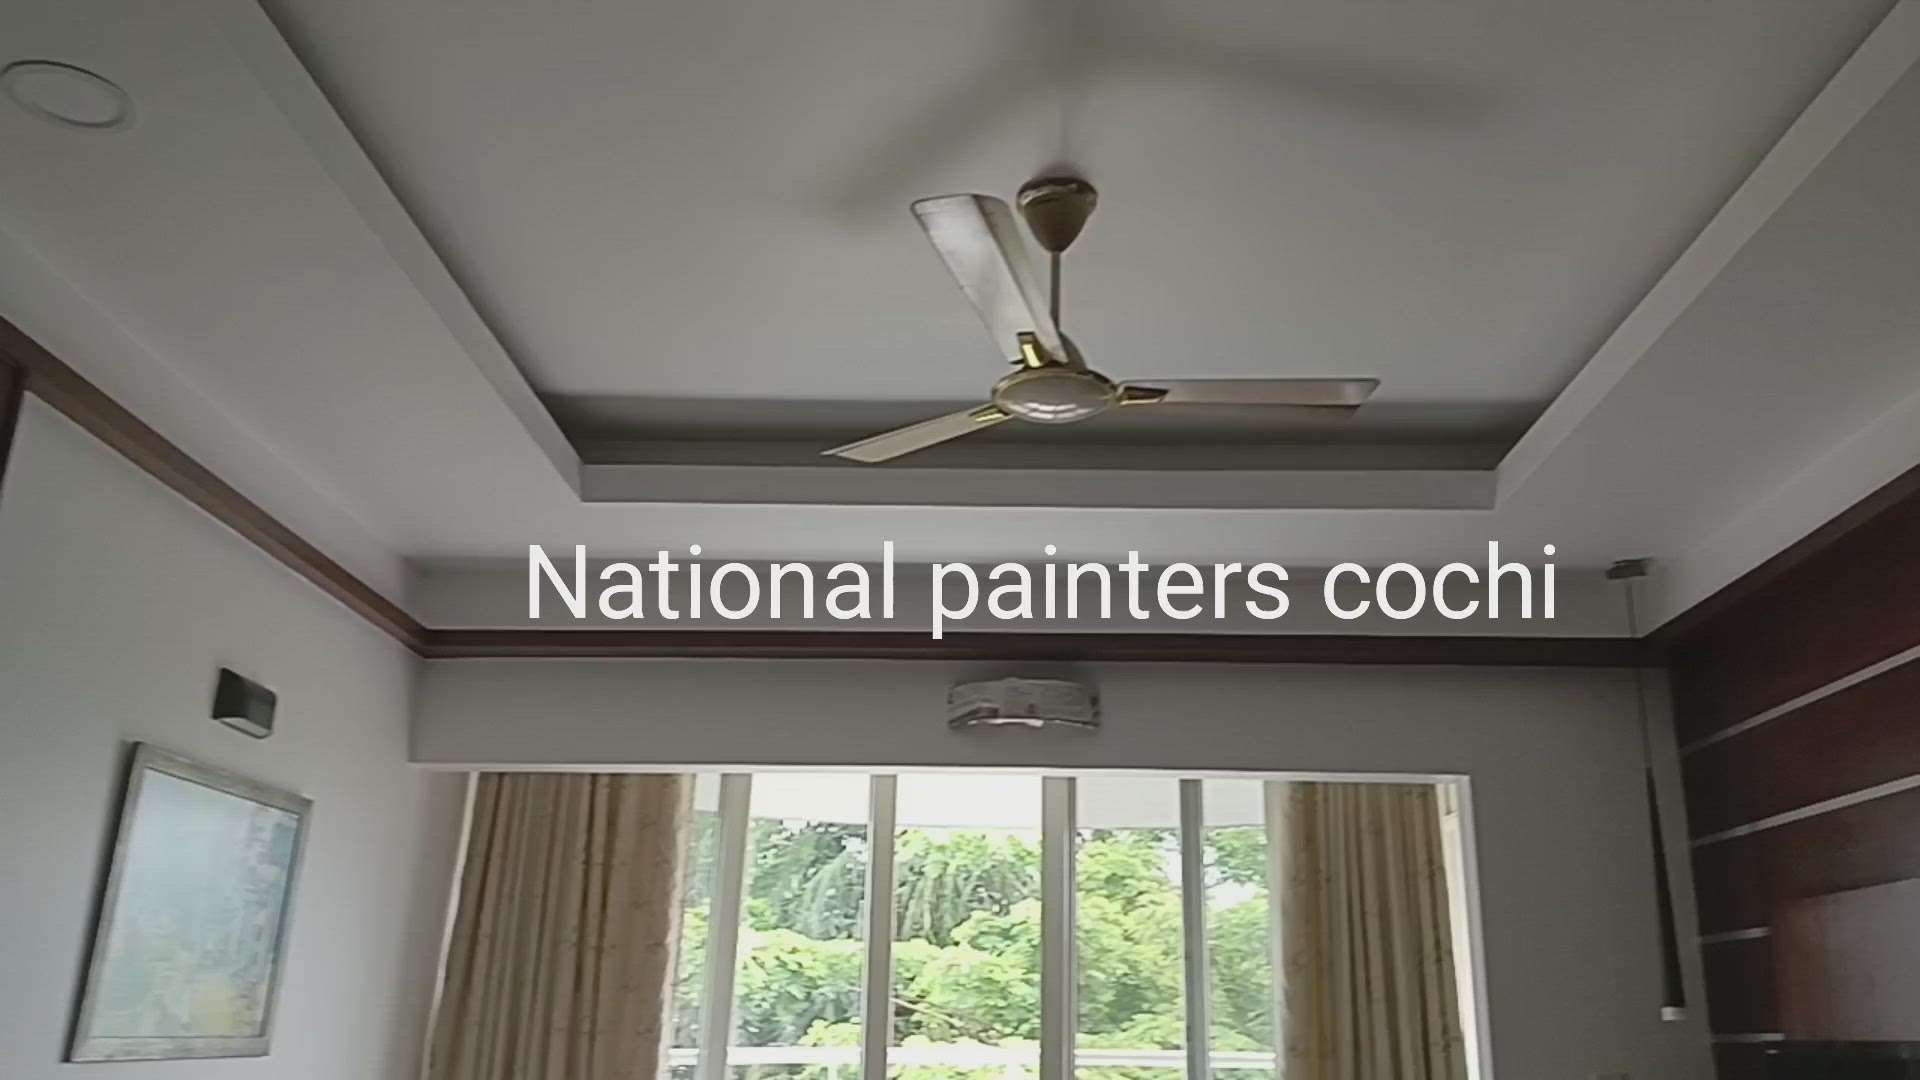 National painters cochi